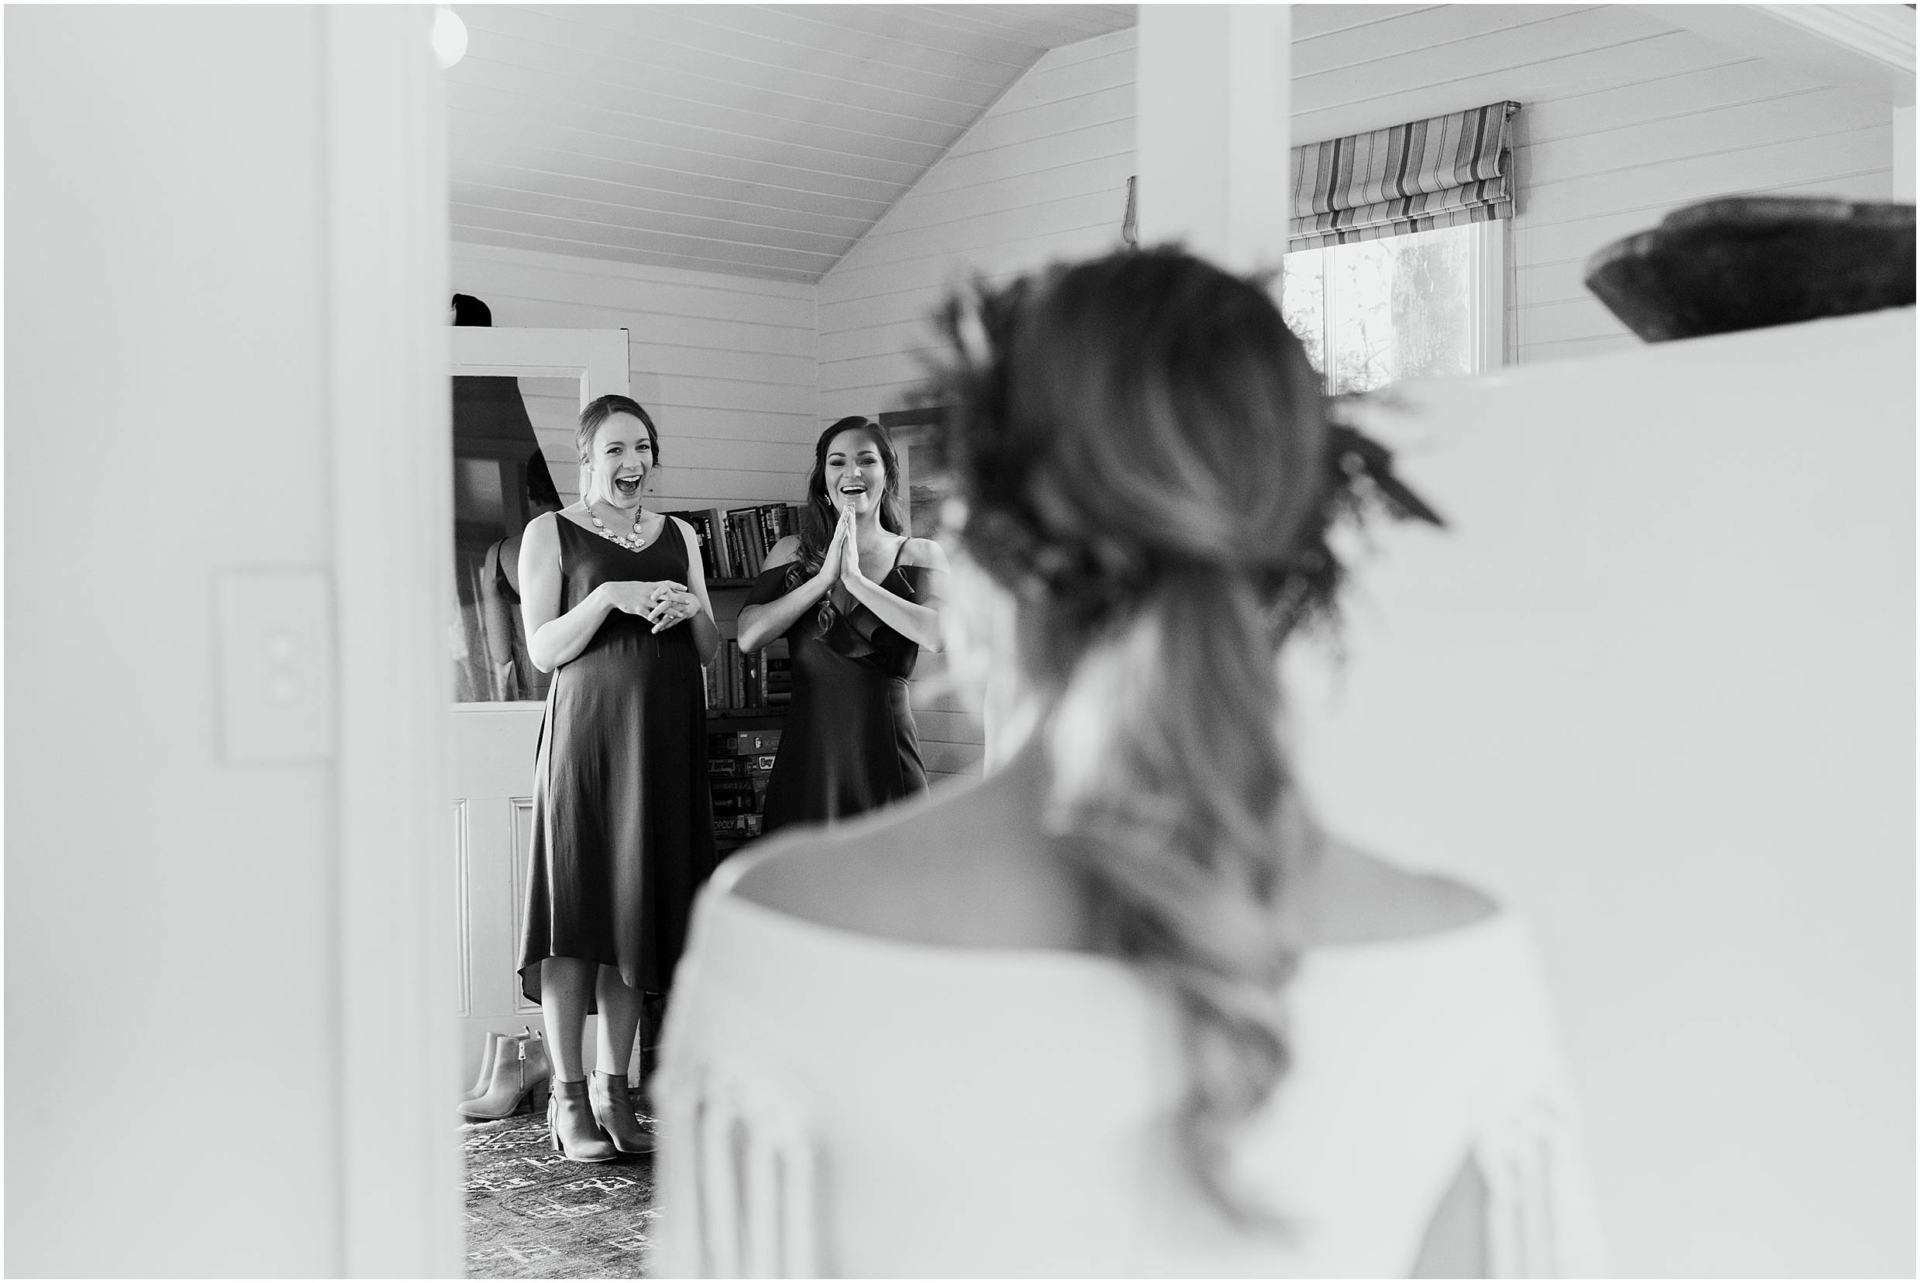 Charlotte Kiri Photography - Wedding Photography of a black and white image of a bride revealing her gown and hair to her bridemaids, as they beam with joy and excitement, in Wanaka, New Zealand.